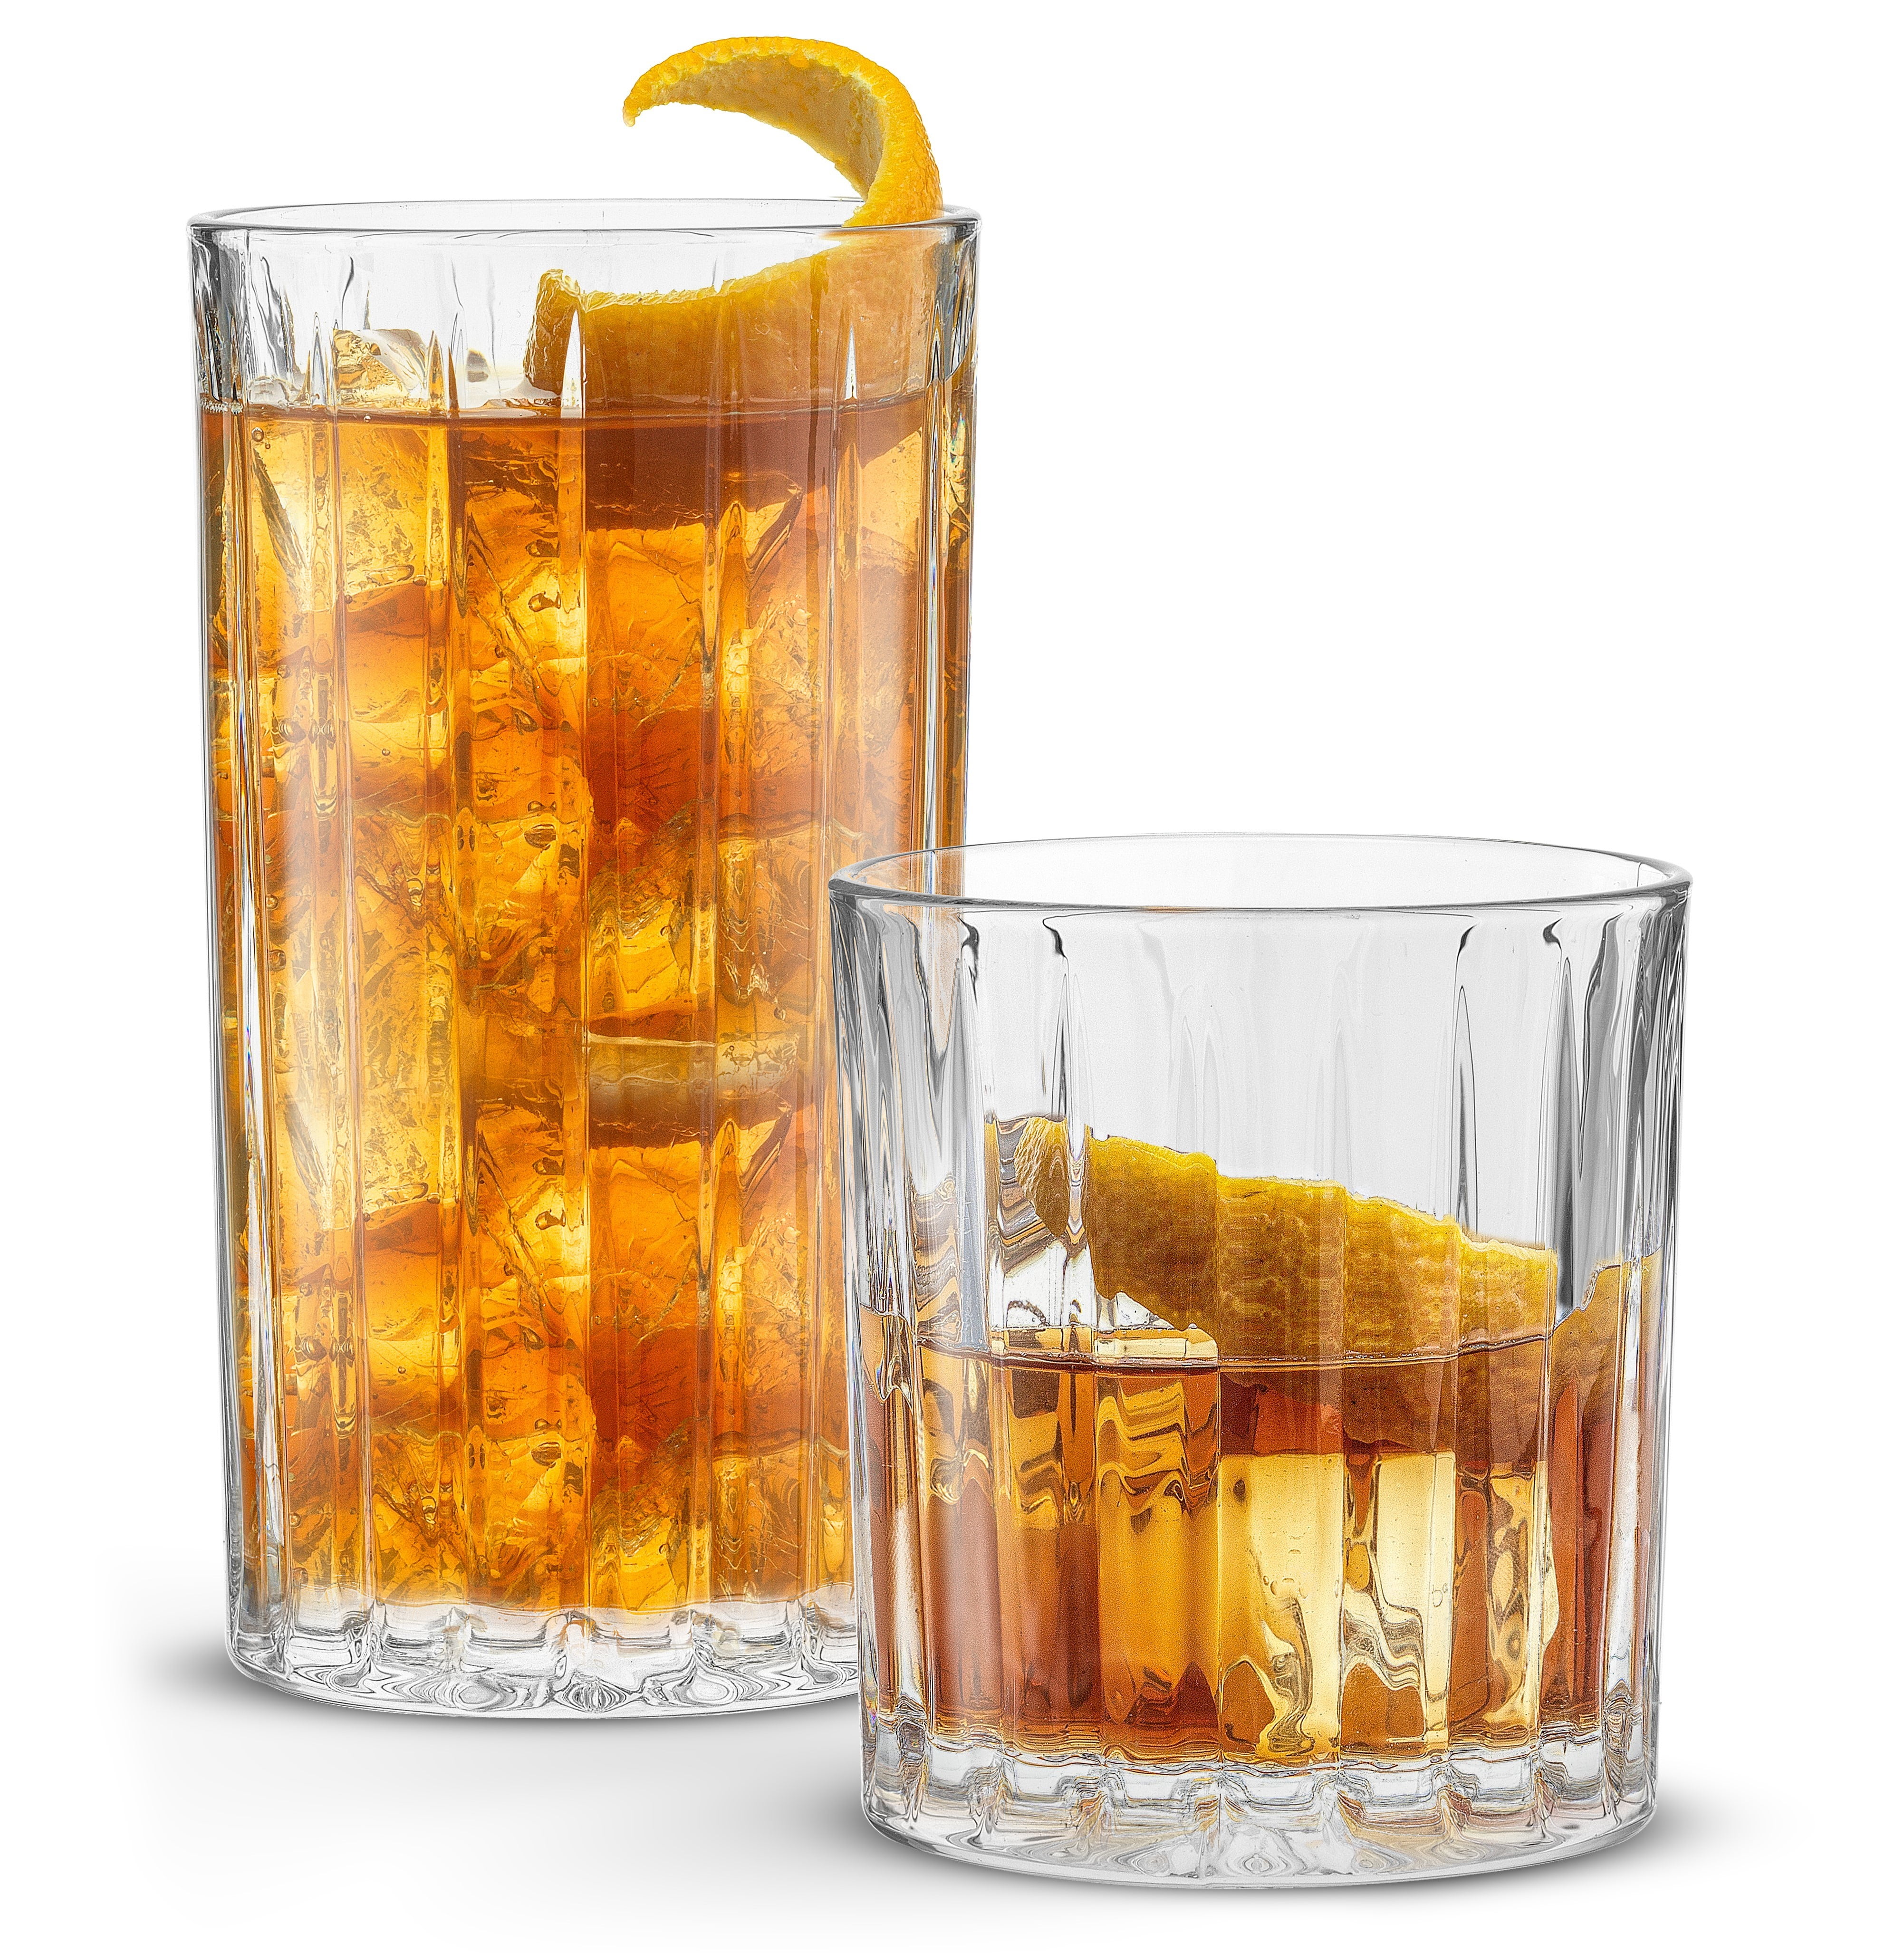 JoyJolt Classic Can Shaped Tumbler Drinking Glass Cups - 17 oz - Set of 6  Highball Drinking Glasses